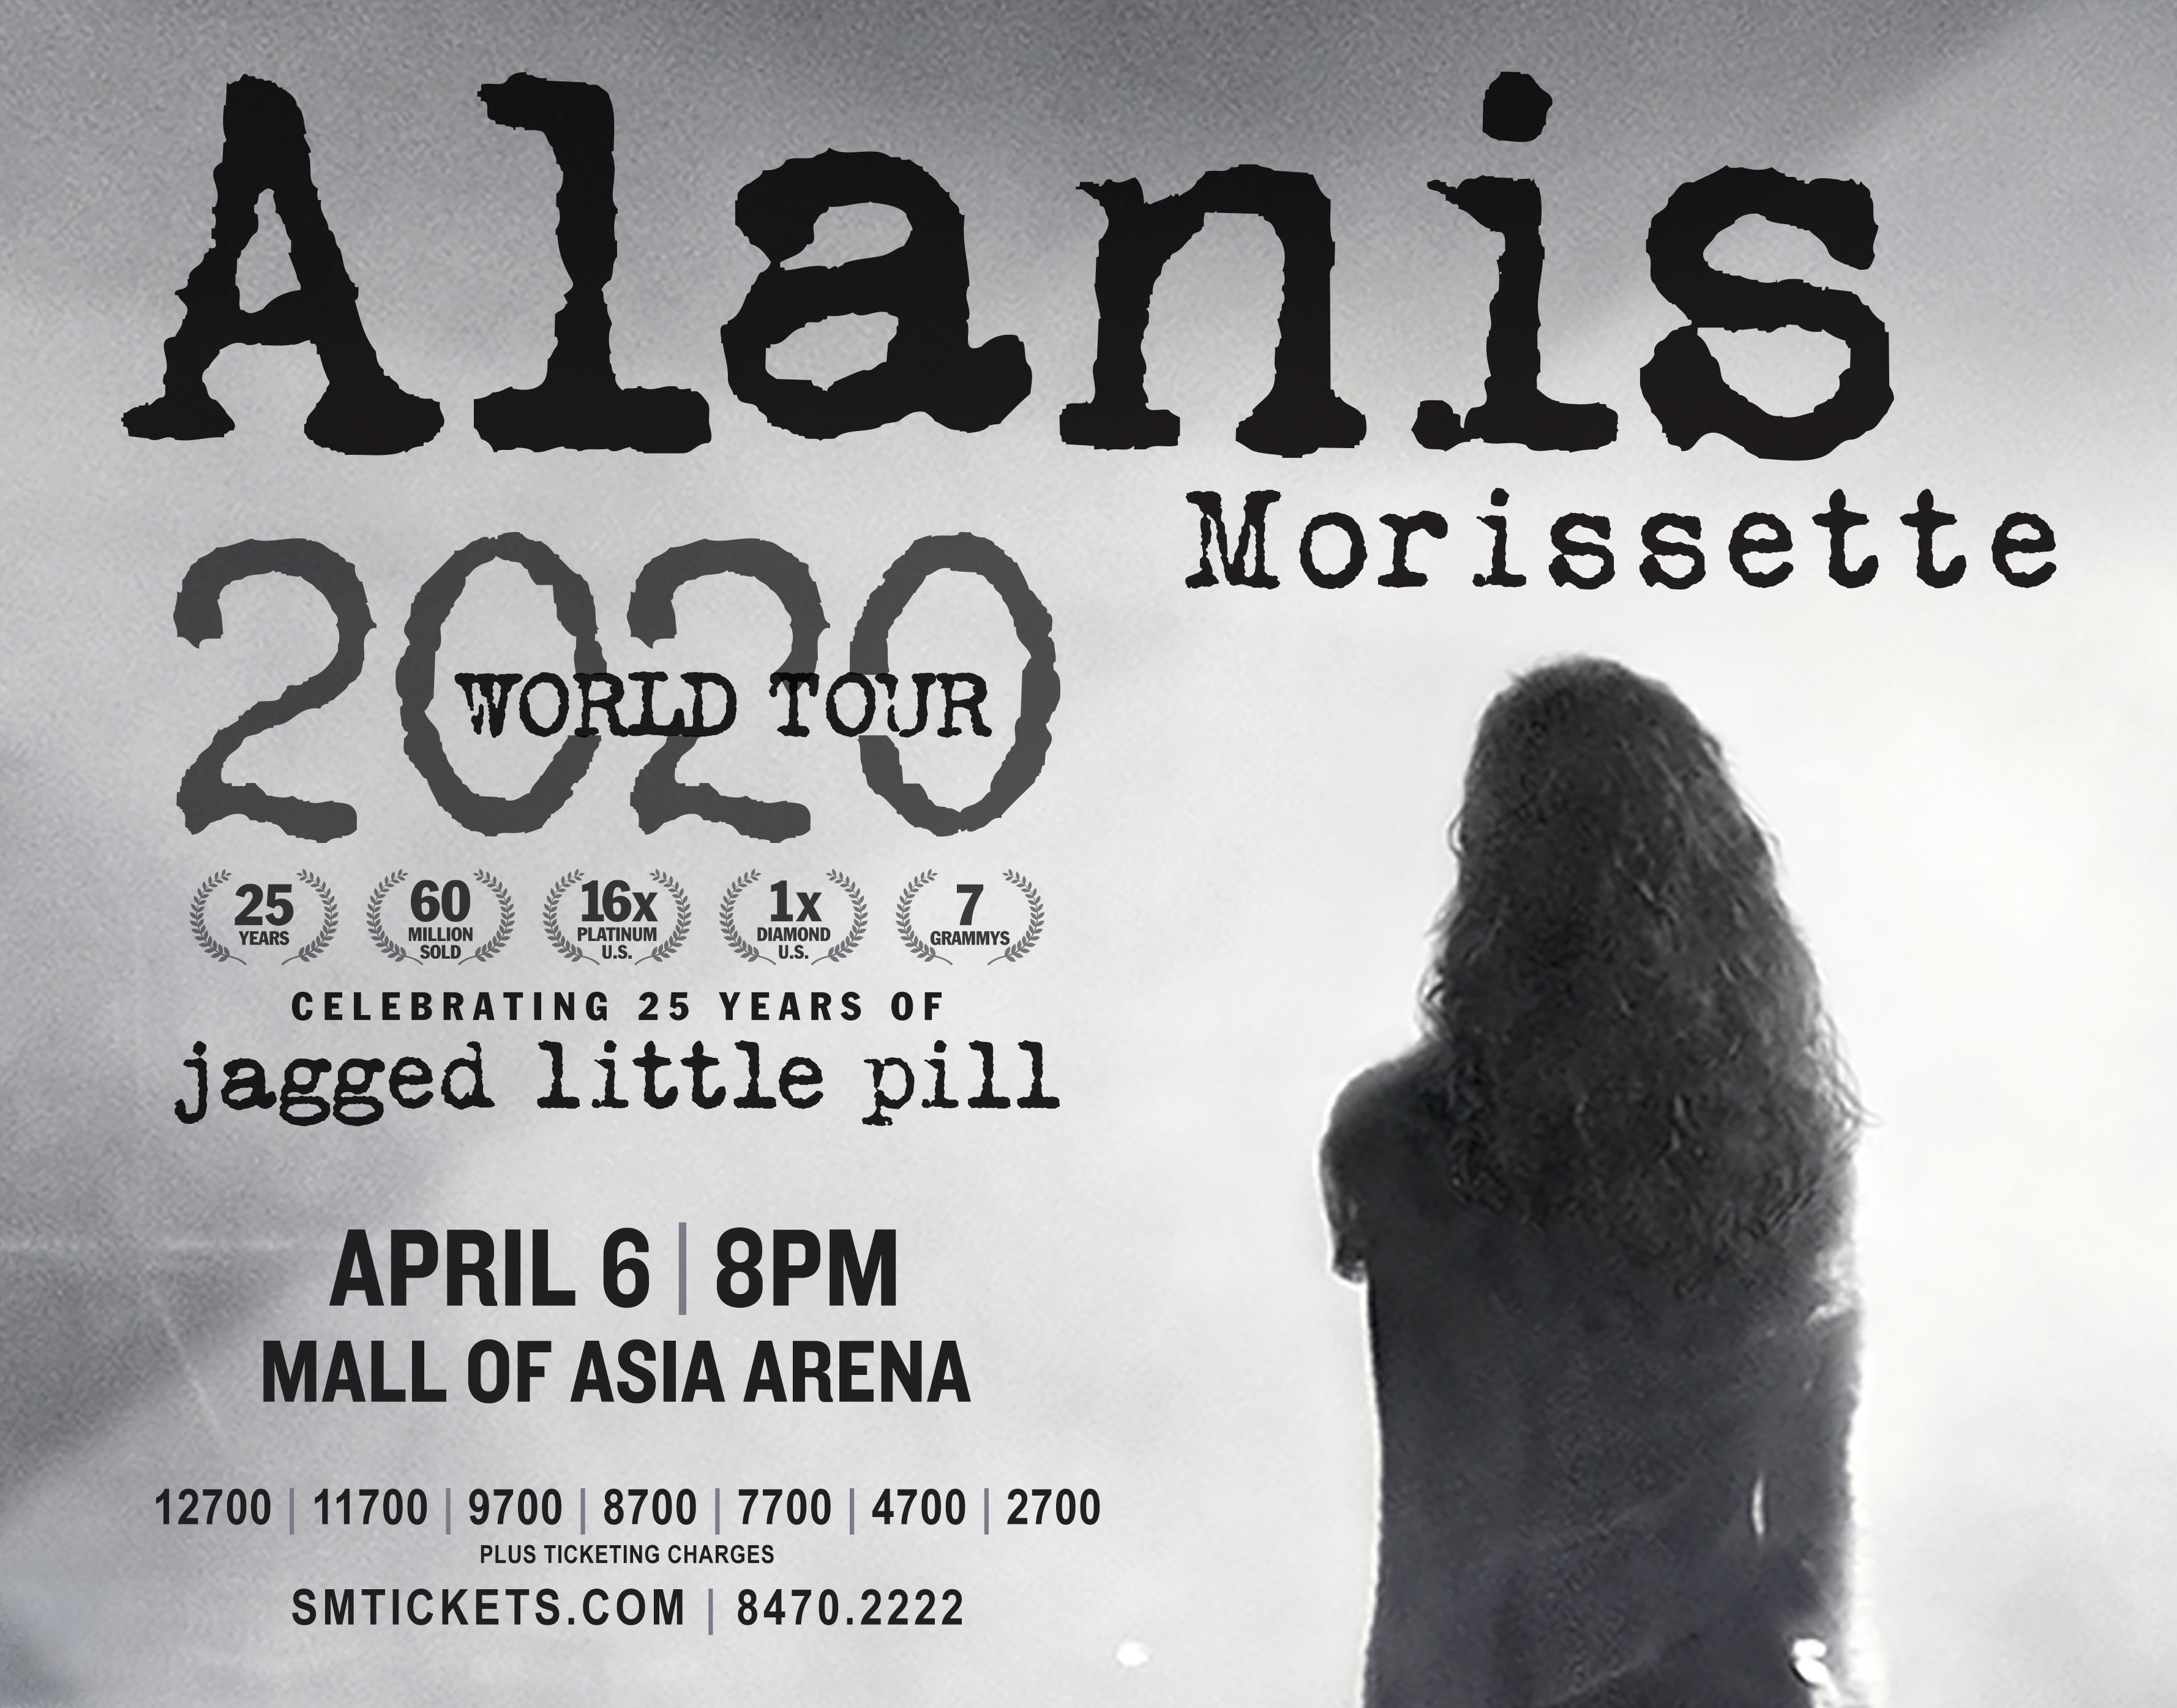 Alanis Morissette to Bring ‘Jagged Little Pill’ Tour to Manila